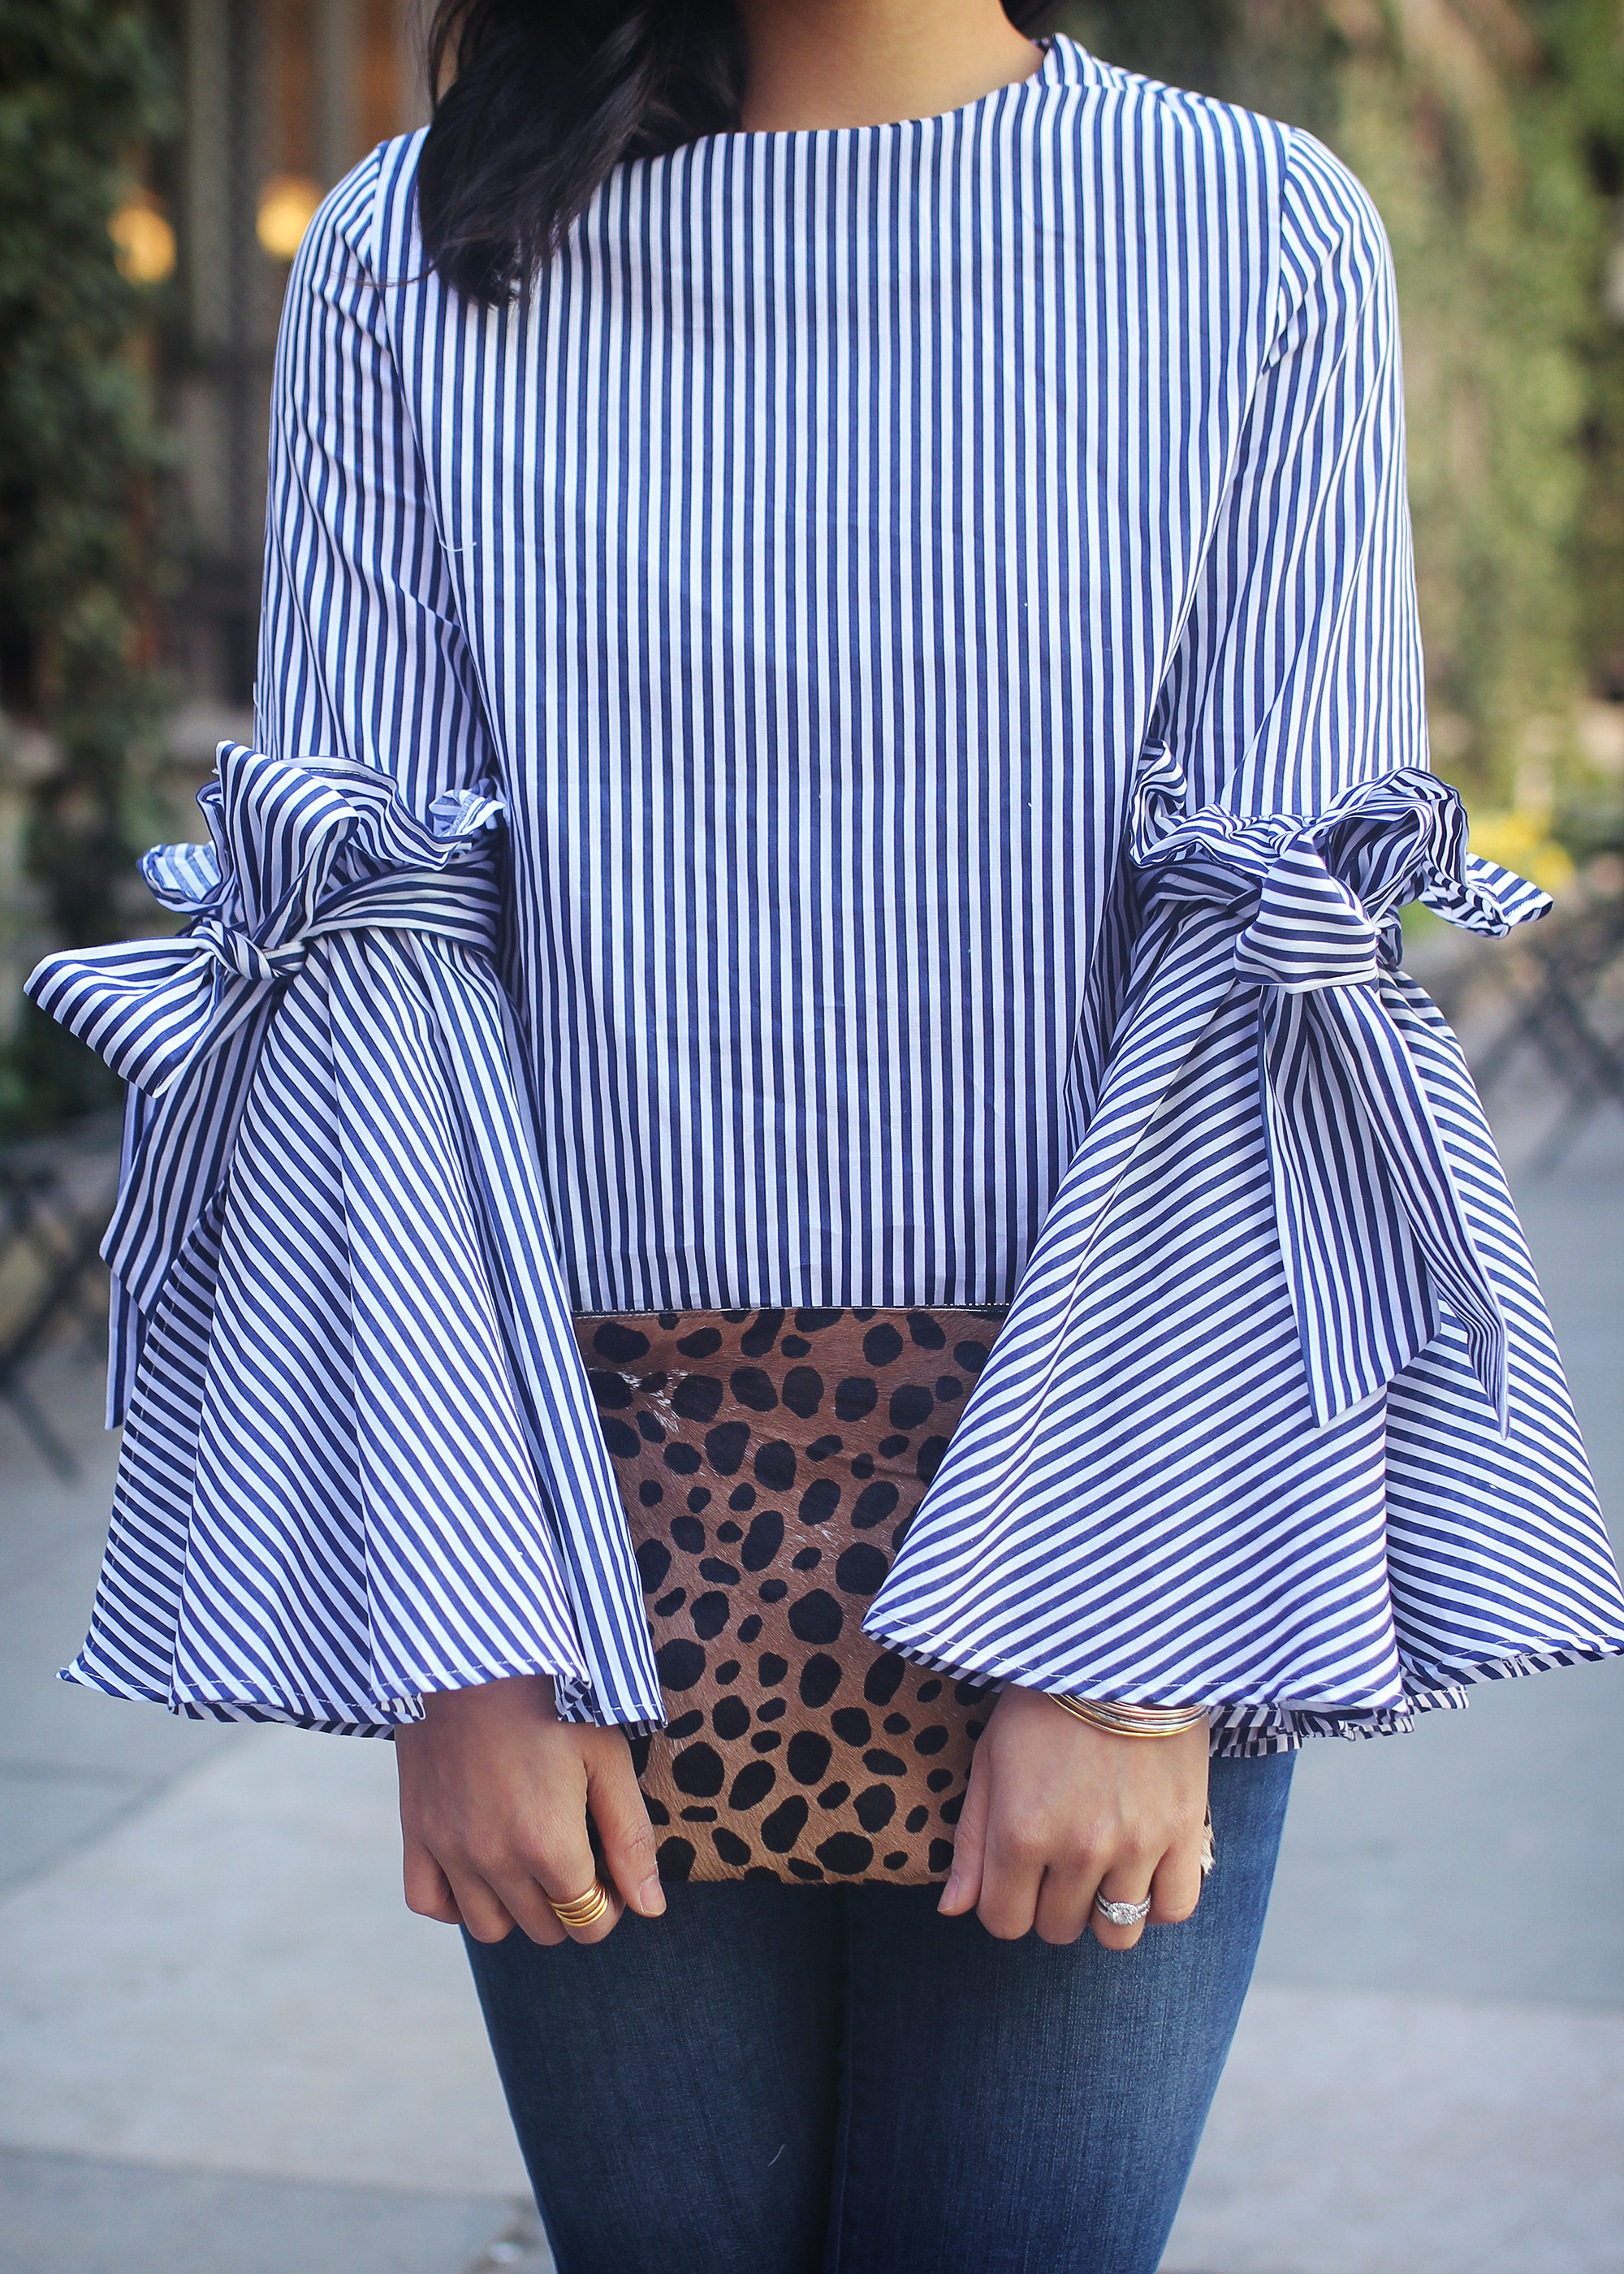 Skirt The Rules / Blue & White Striped Bell Sleeve Top